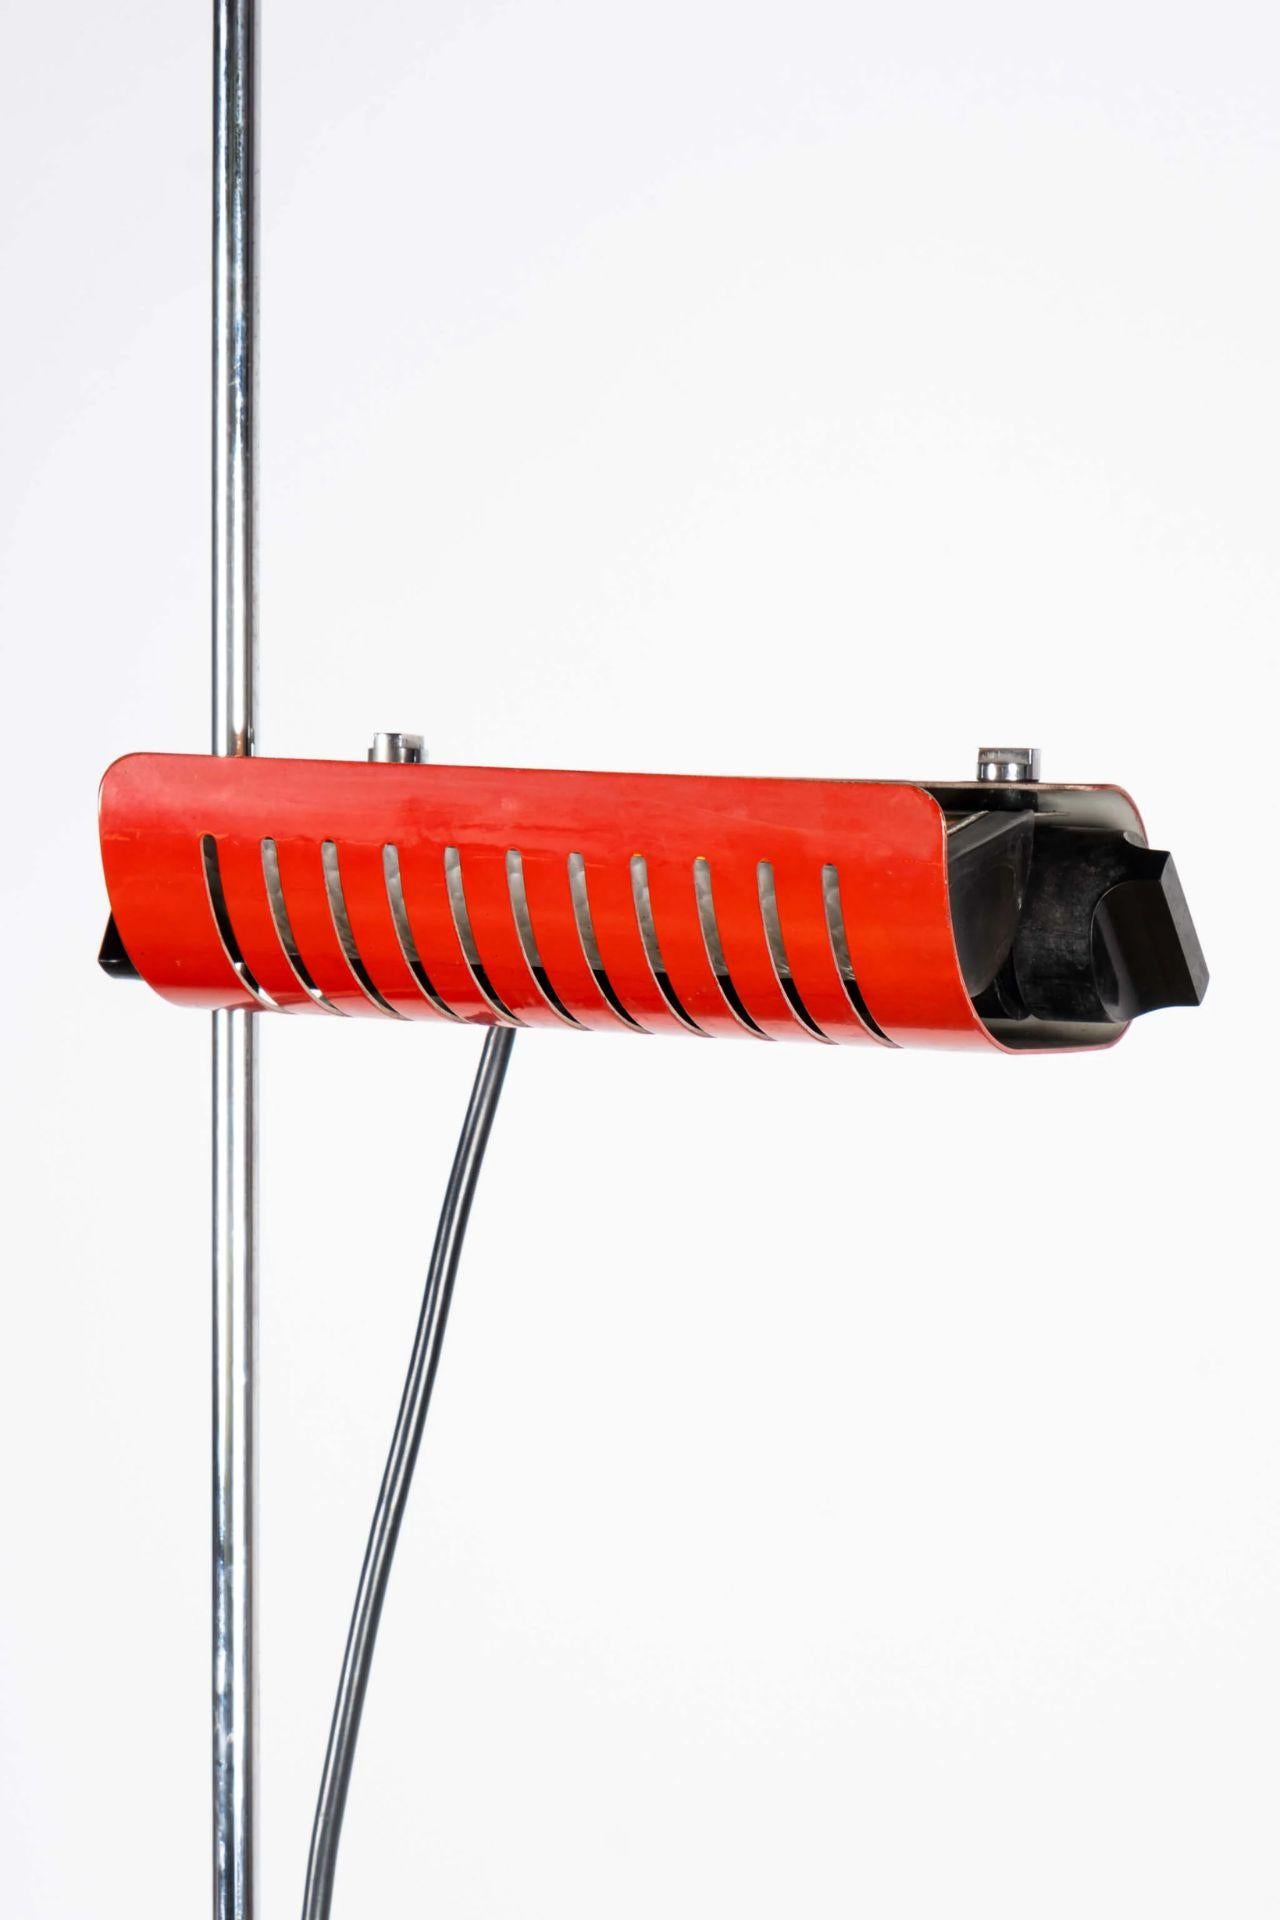 A minimalistic lamp designed by Joe Colombo for Oluce, the ‘Spider’ floor lamp features a stove-enamelled sheet metal reflector, purposely designed to direct light. The head of the lamp is connected to the stem by a plastic joint, allowing the